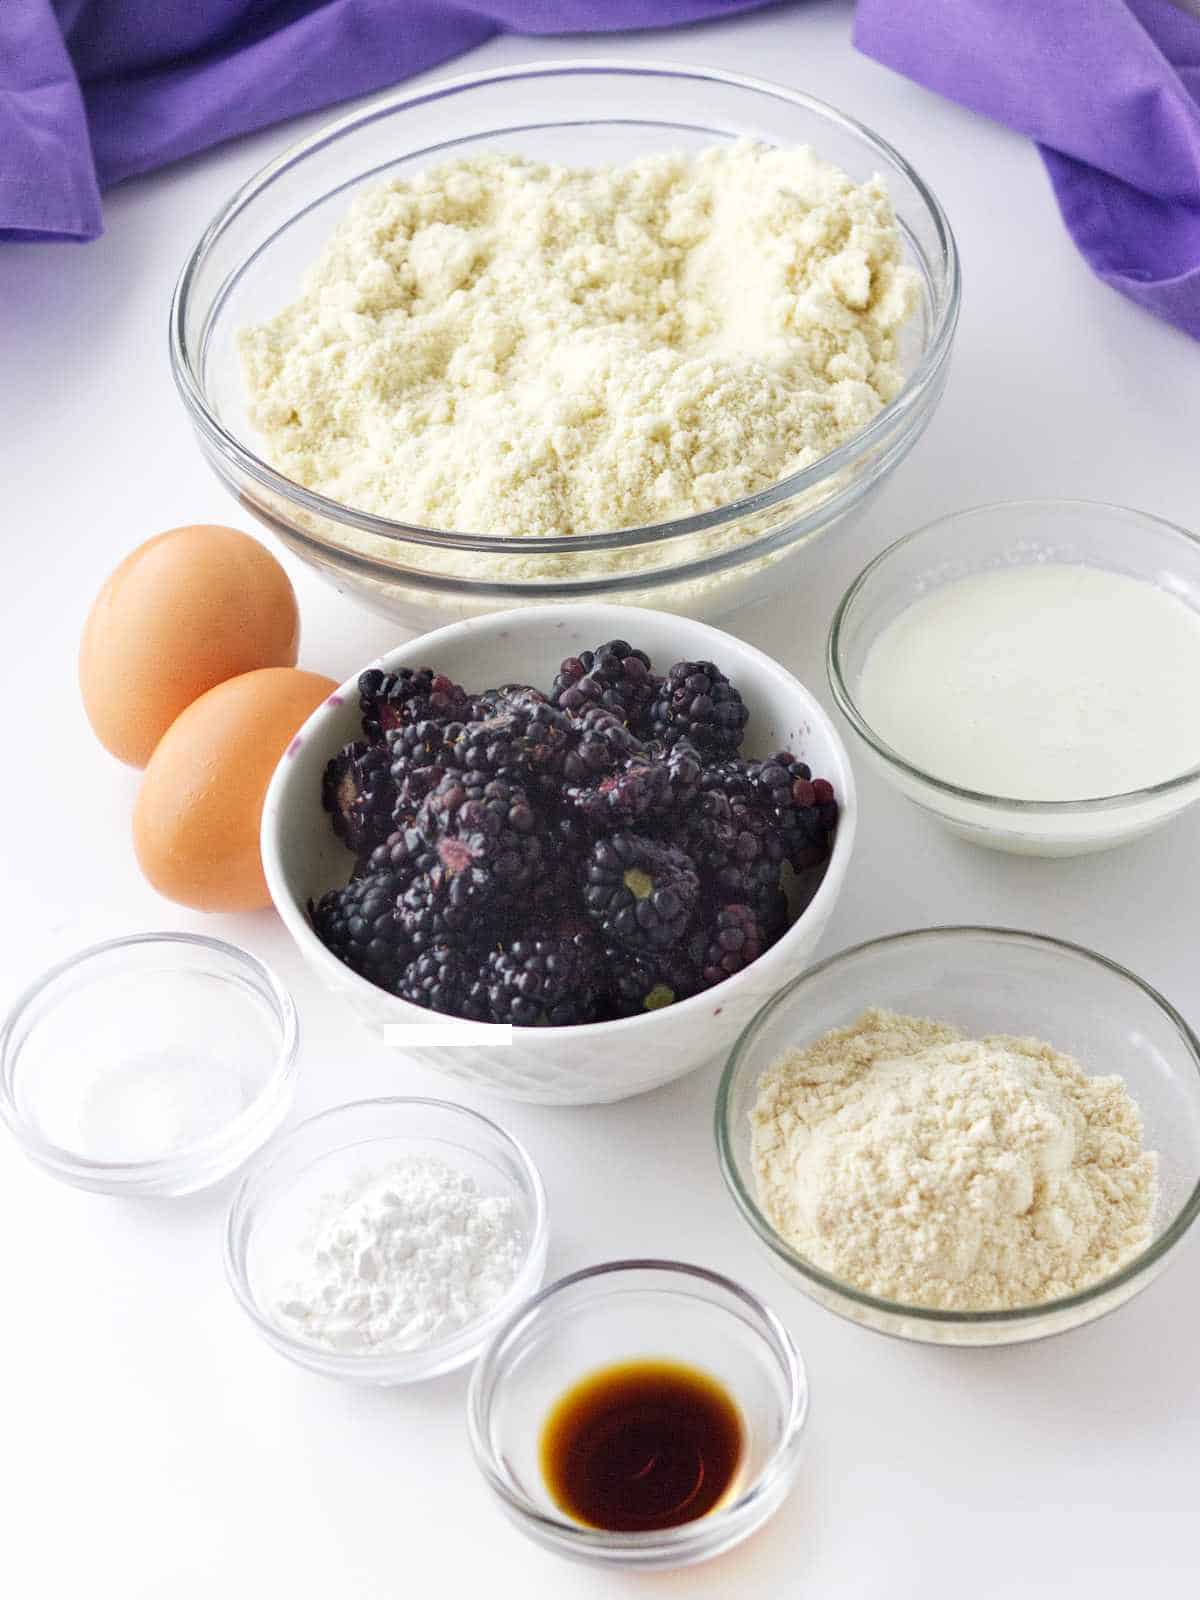 ingredients for making almond flour blackberry muffins.